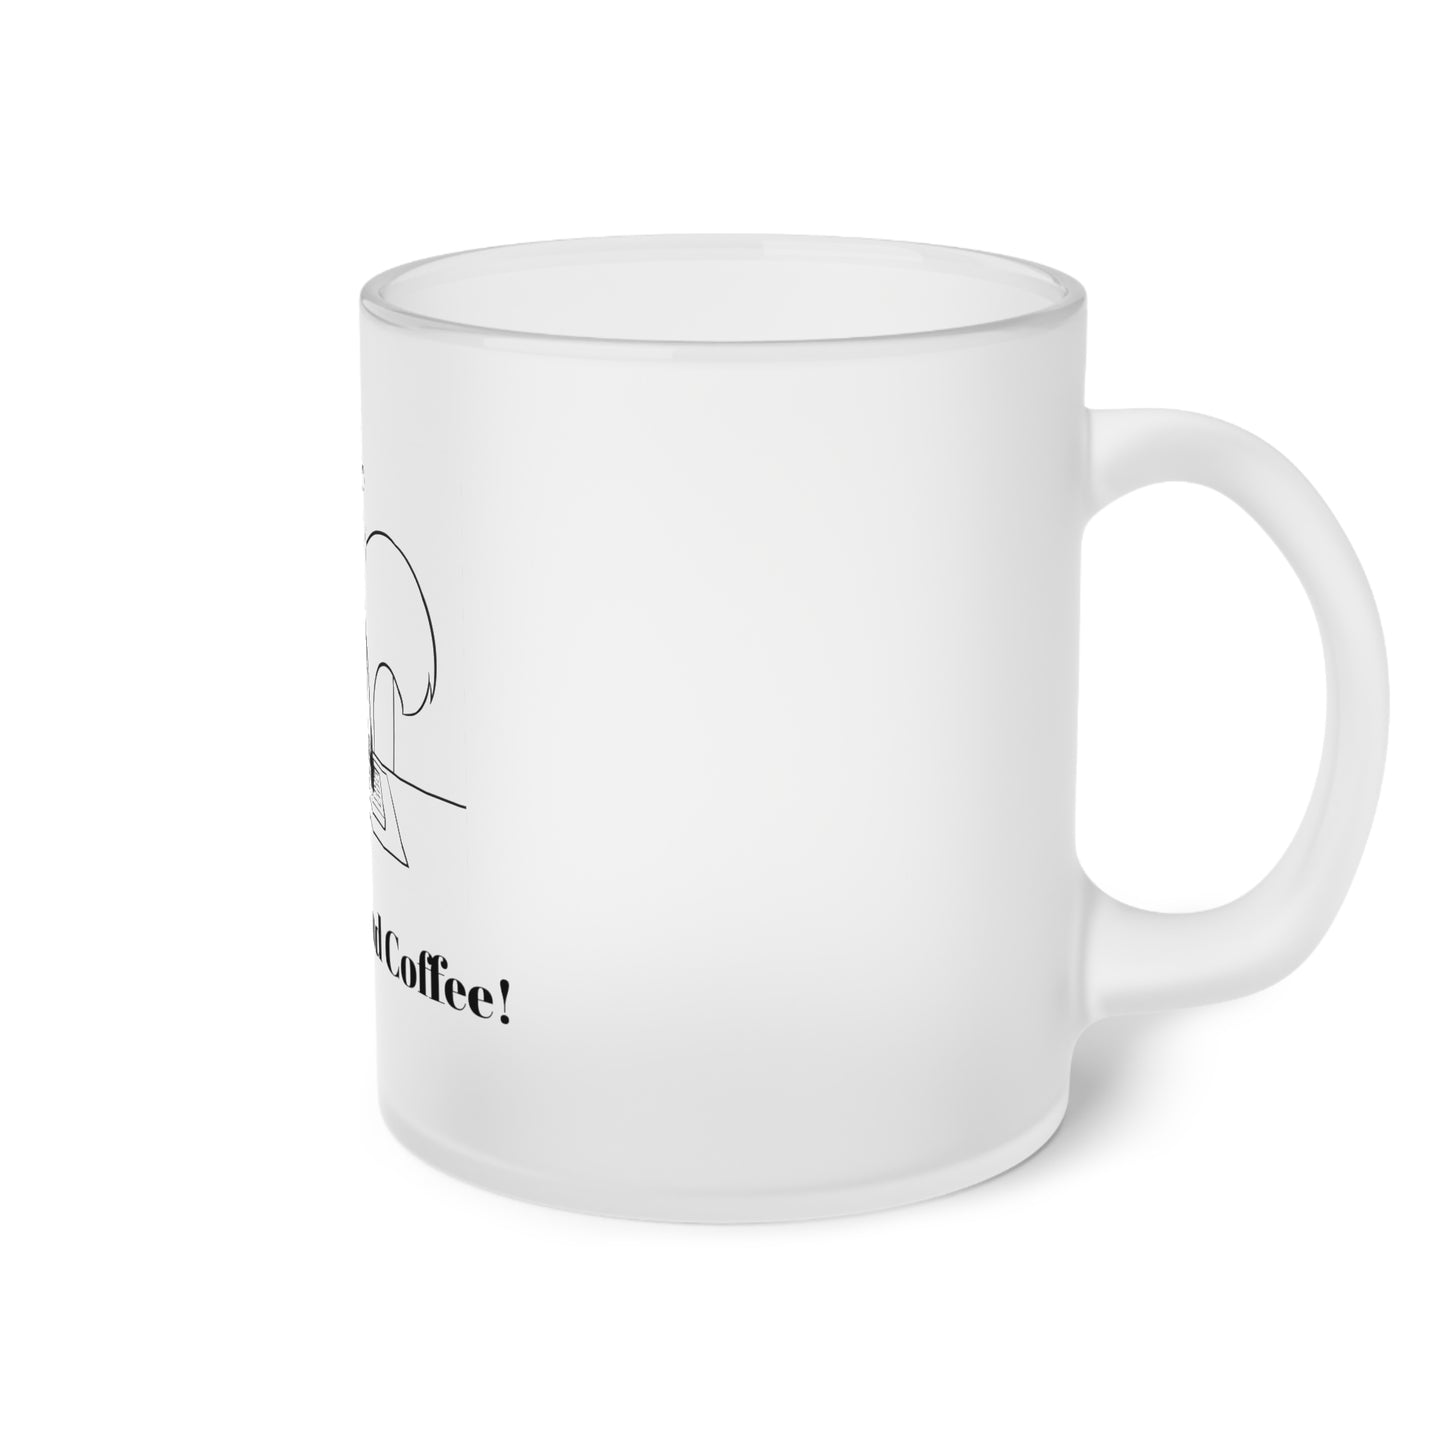 Nutty the Squirrel. I love Nuts and Coffee. Frosted Glass Mug